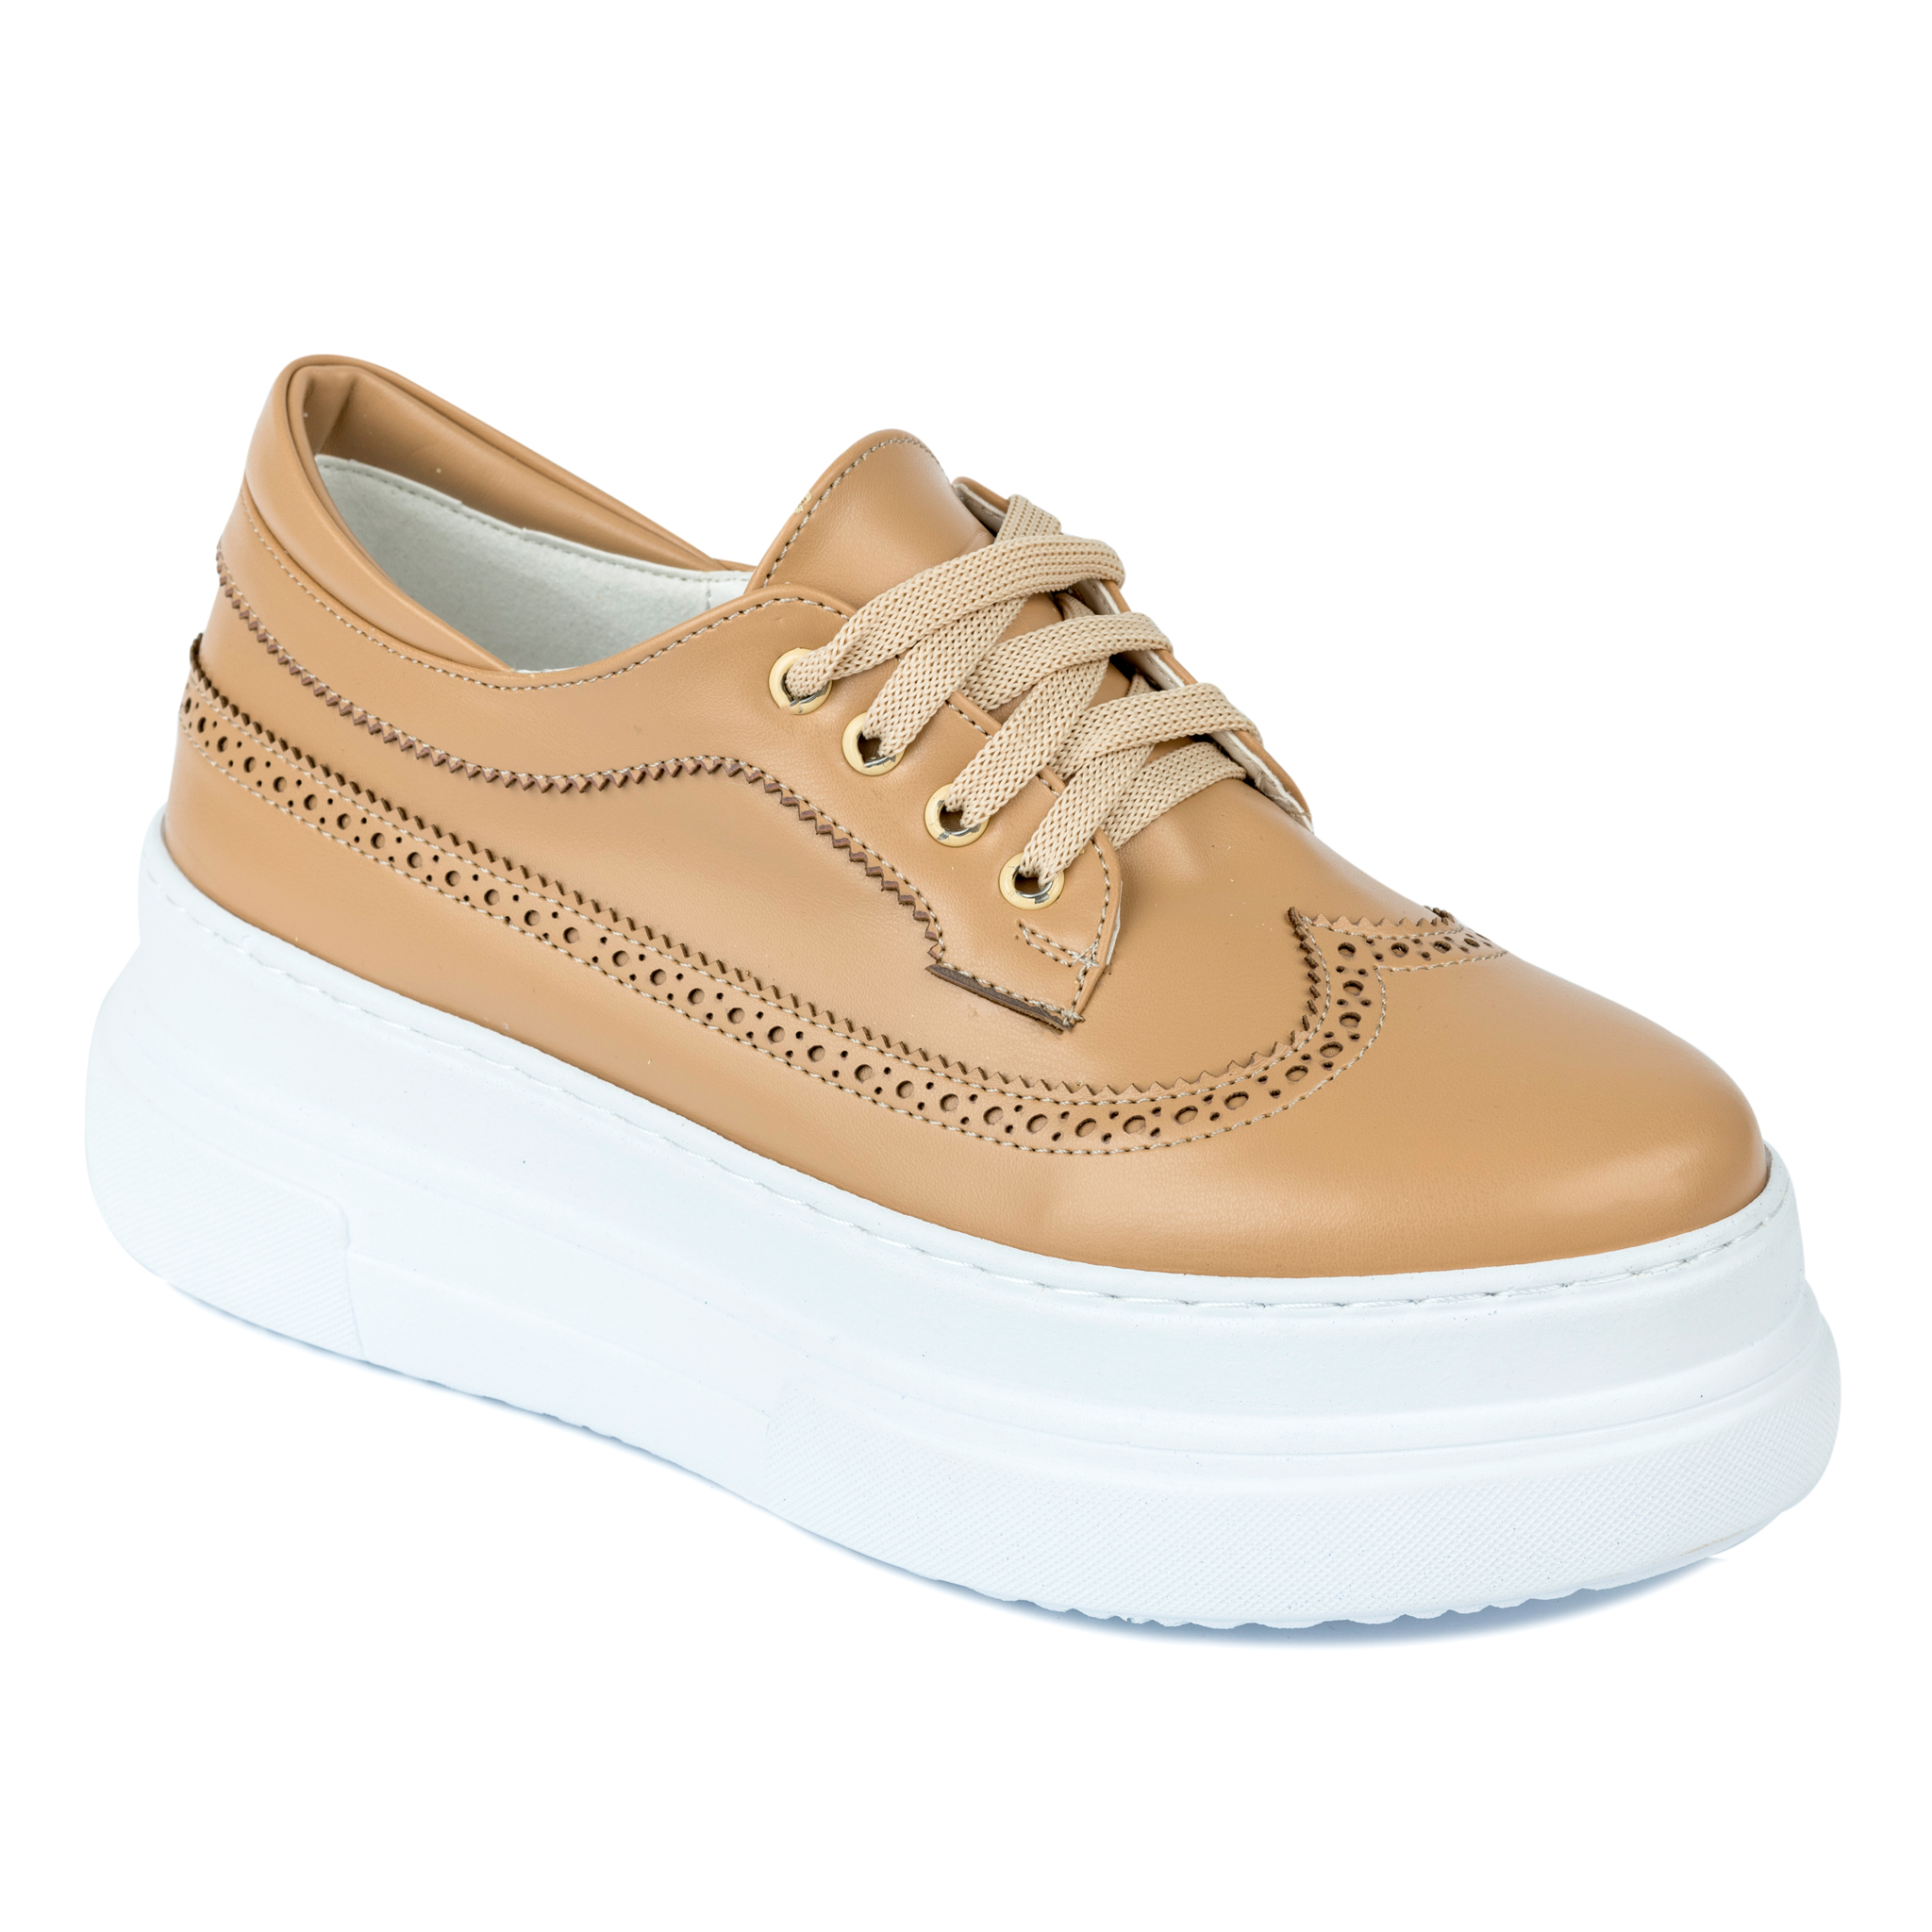 HIGH SOLE SHALLOW SHOES - BEIGE